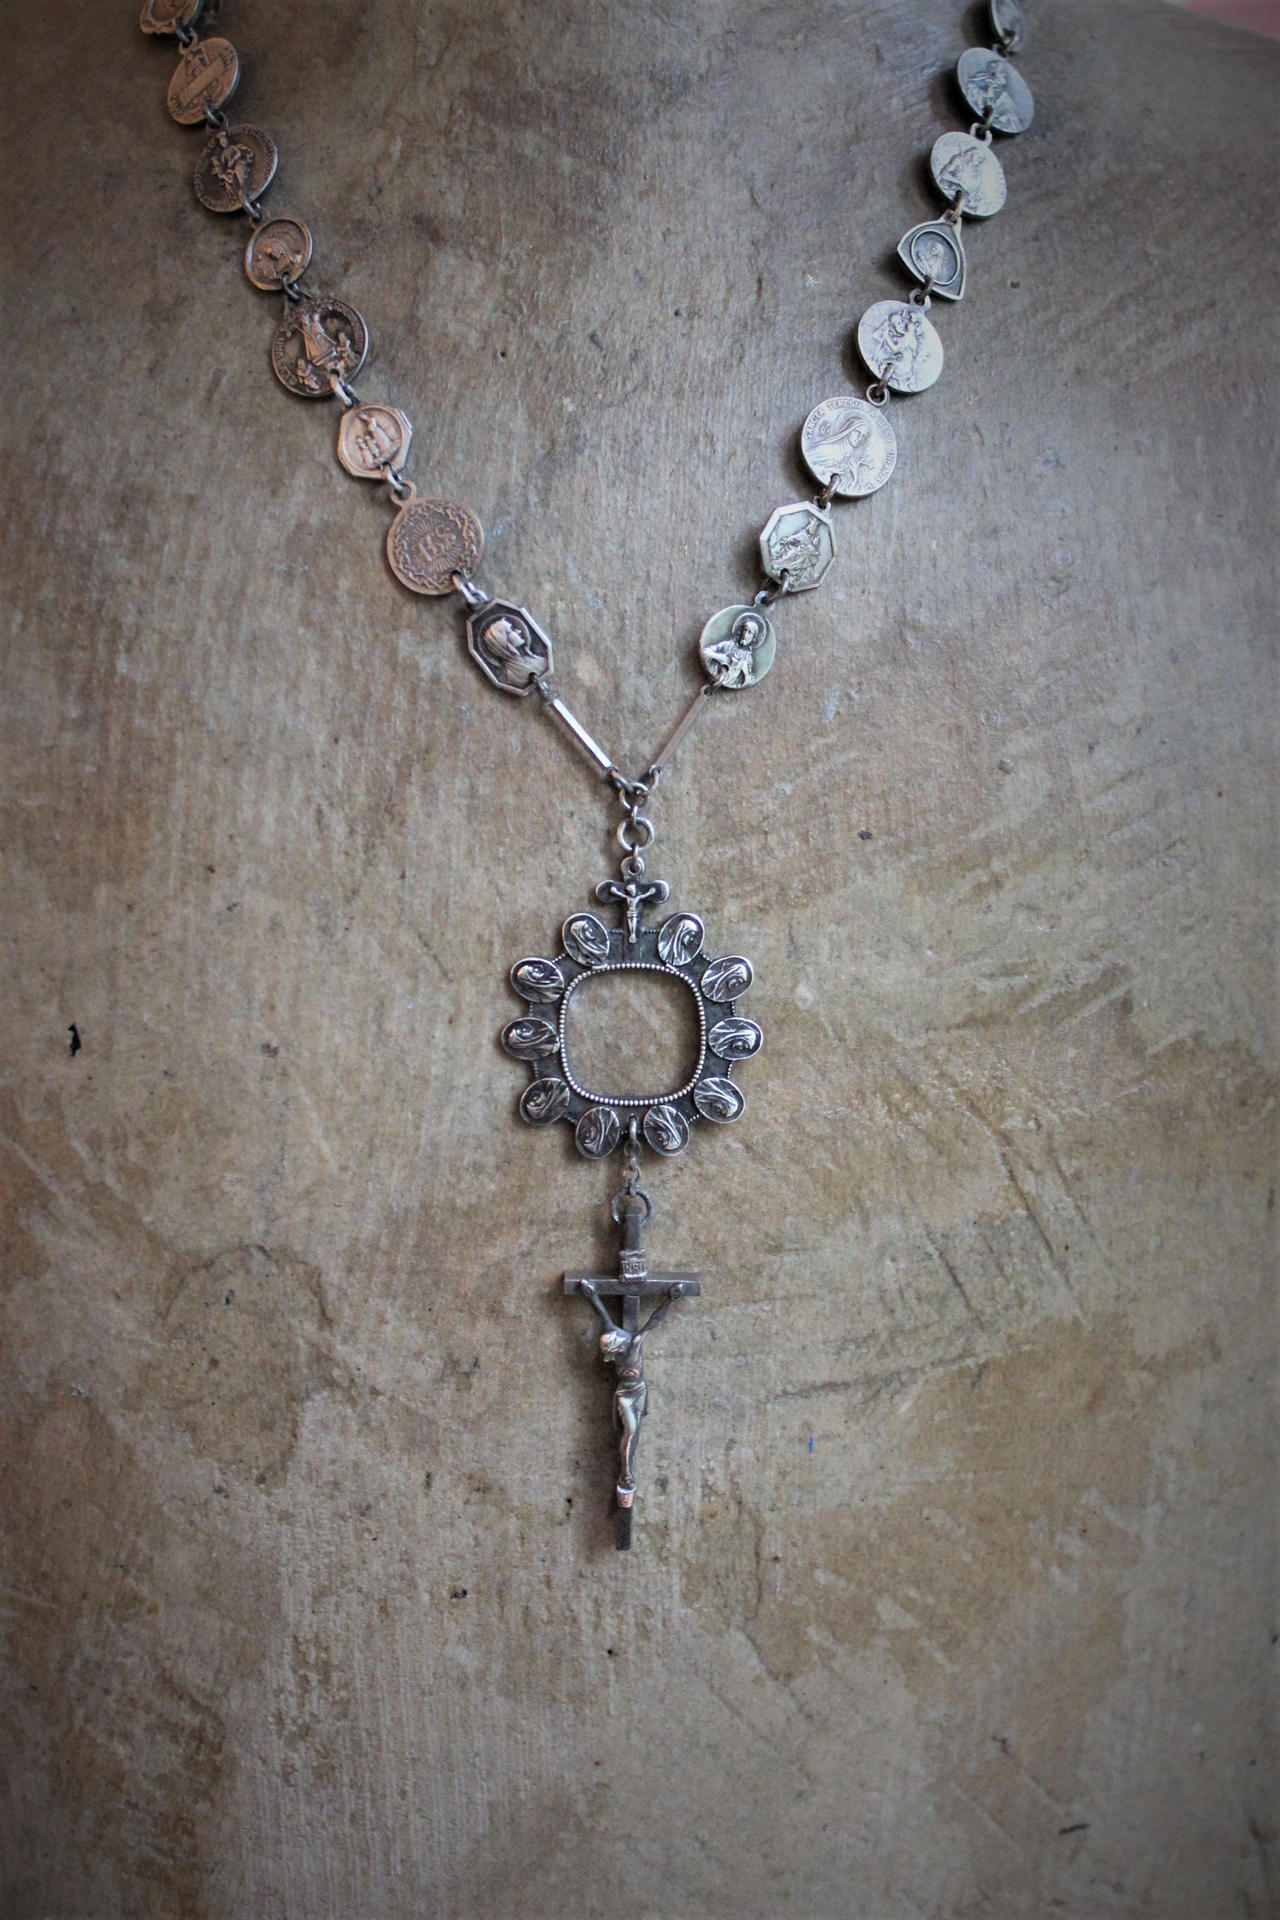 NEW! Antique French Medal Chain Necklace with Rare Antique Sterling Thumb Rosary & Crucifix